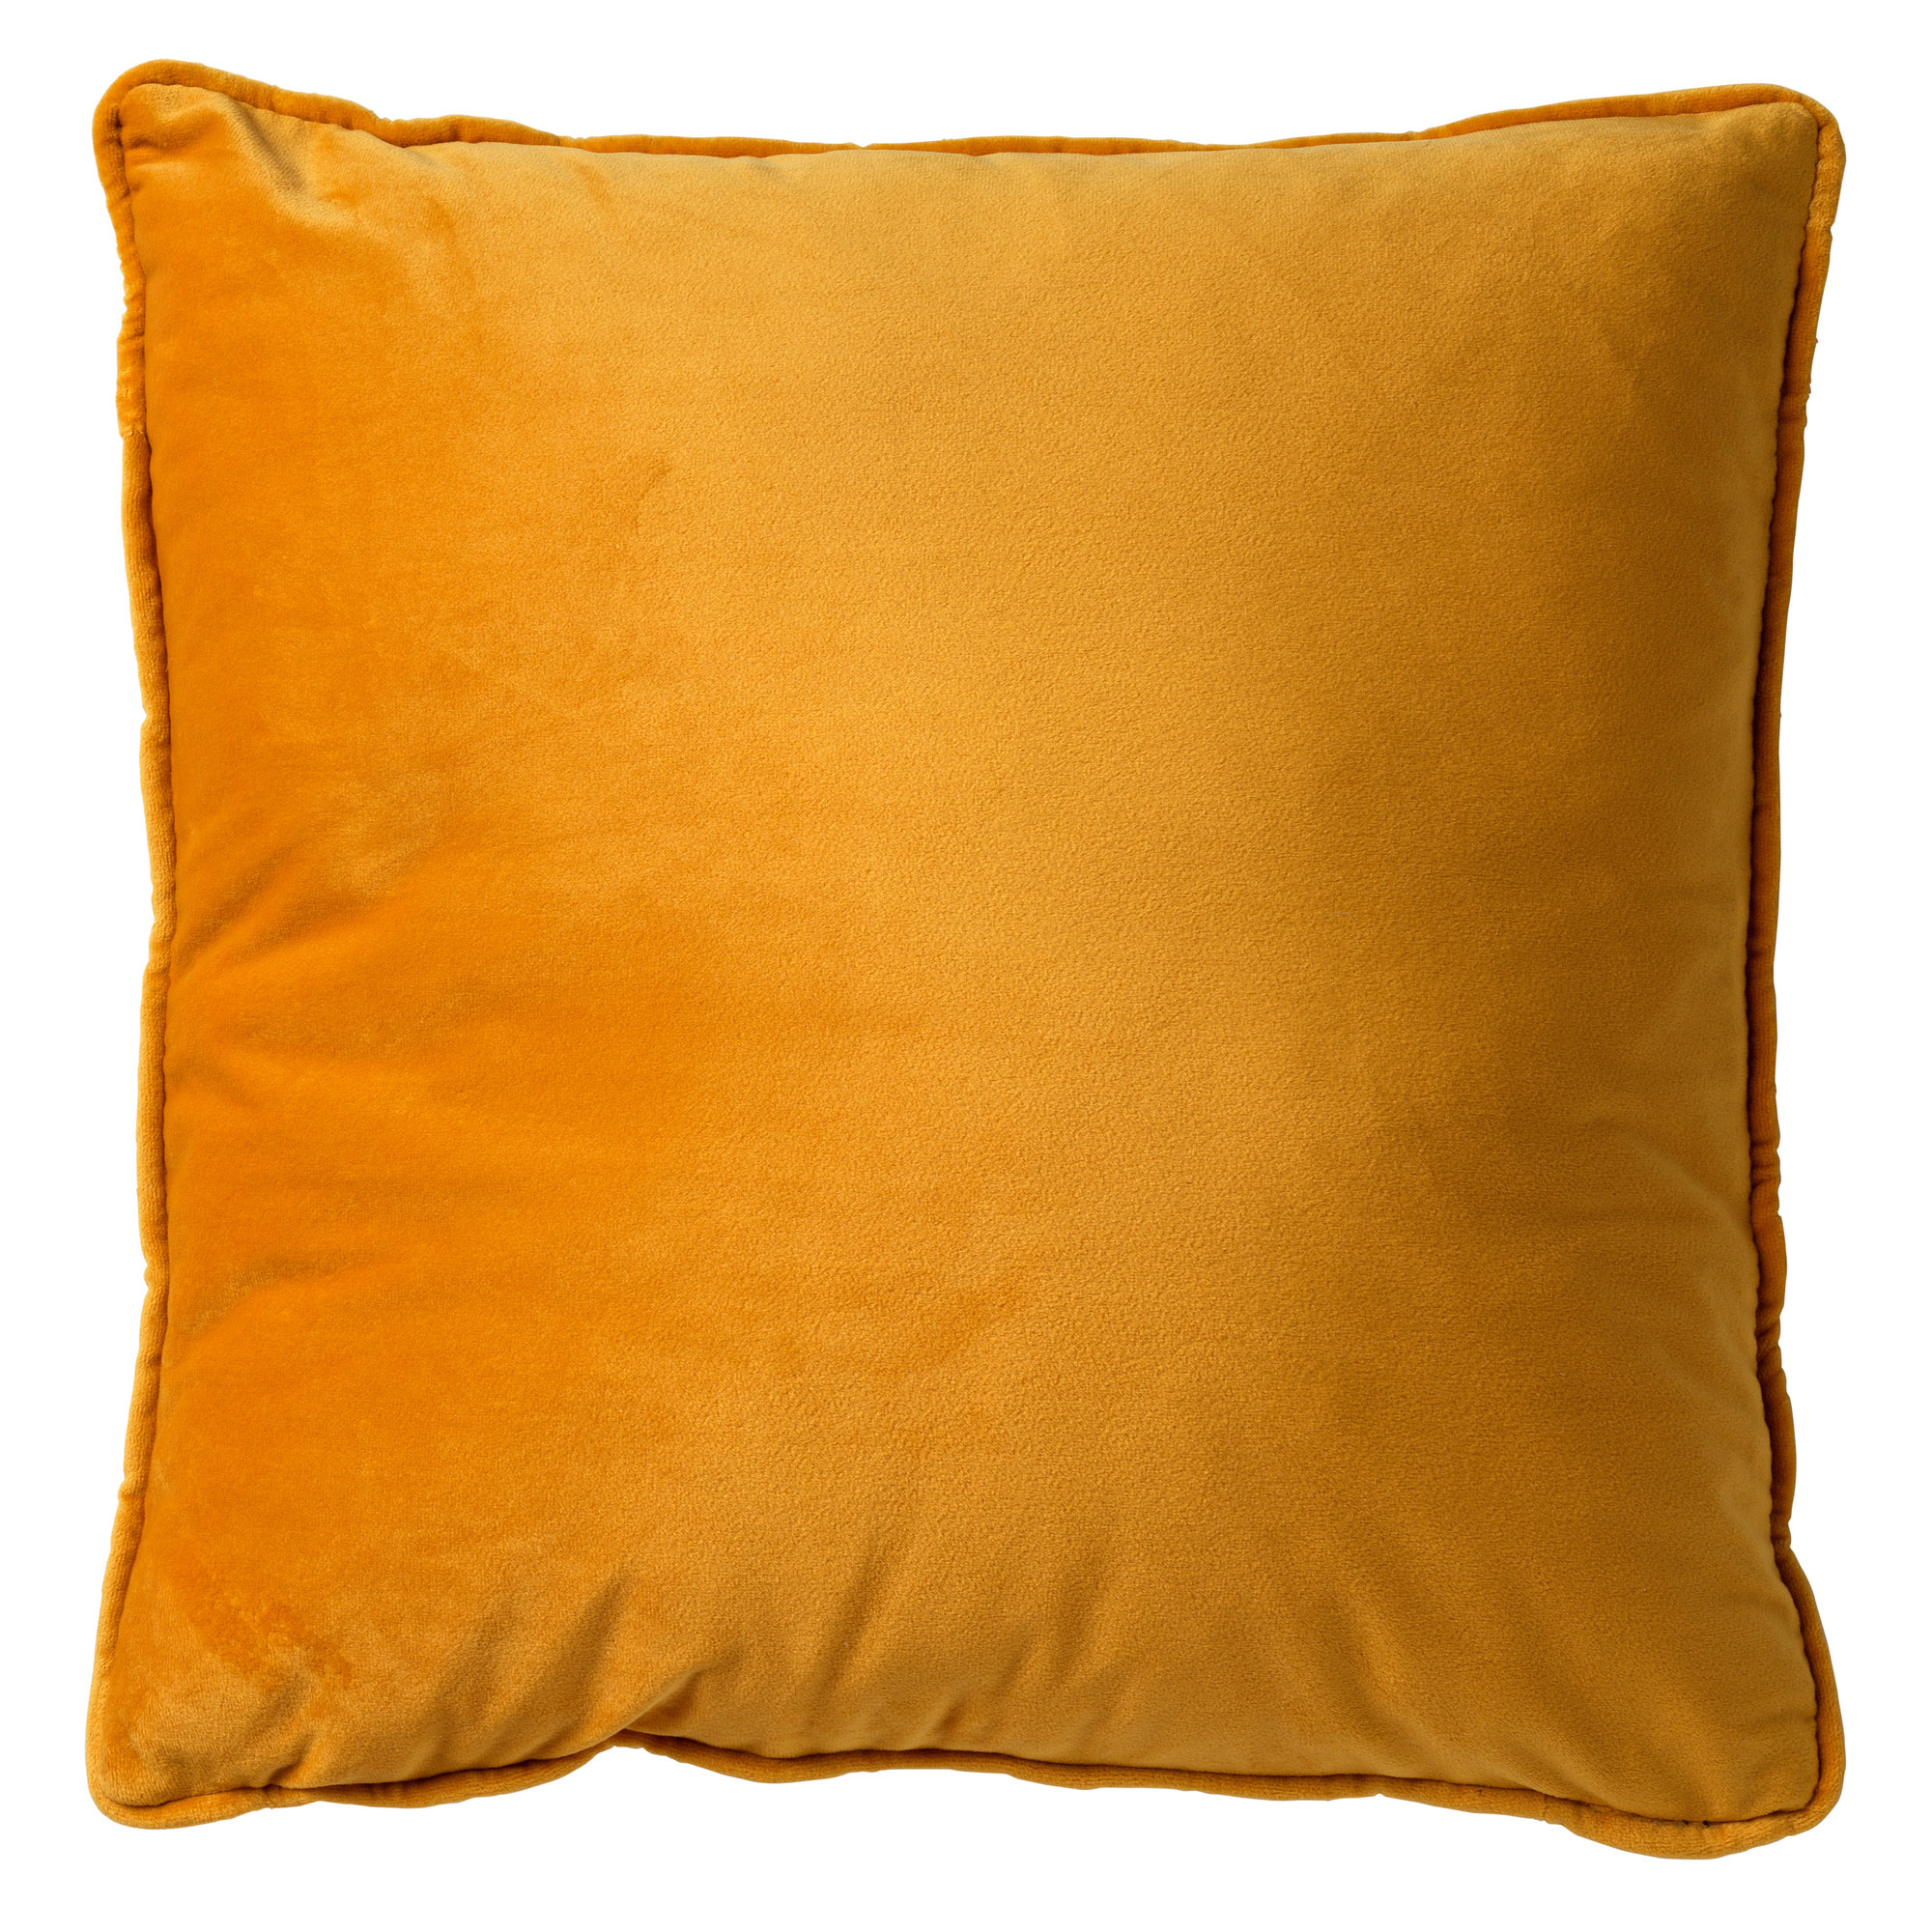 FINNA - Cushion 45x45 cm with cushion cover made of 100% recycled polyester - Eco Line collection - Golden Glow - yellow